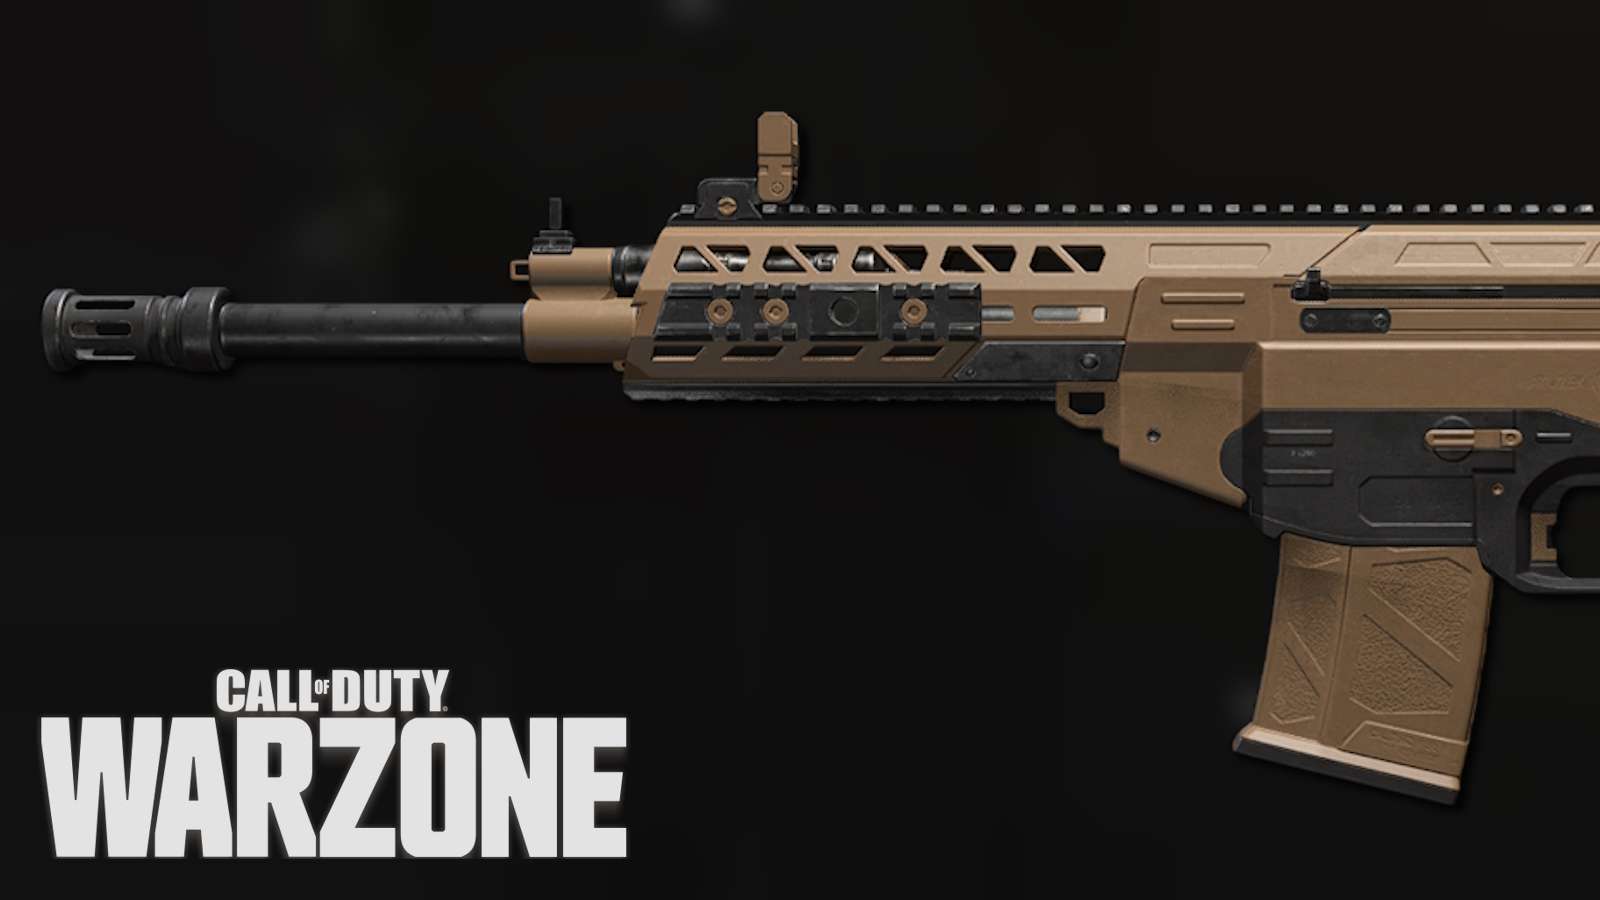 SOA Subverter in Call of Duty: Warzone.